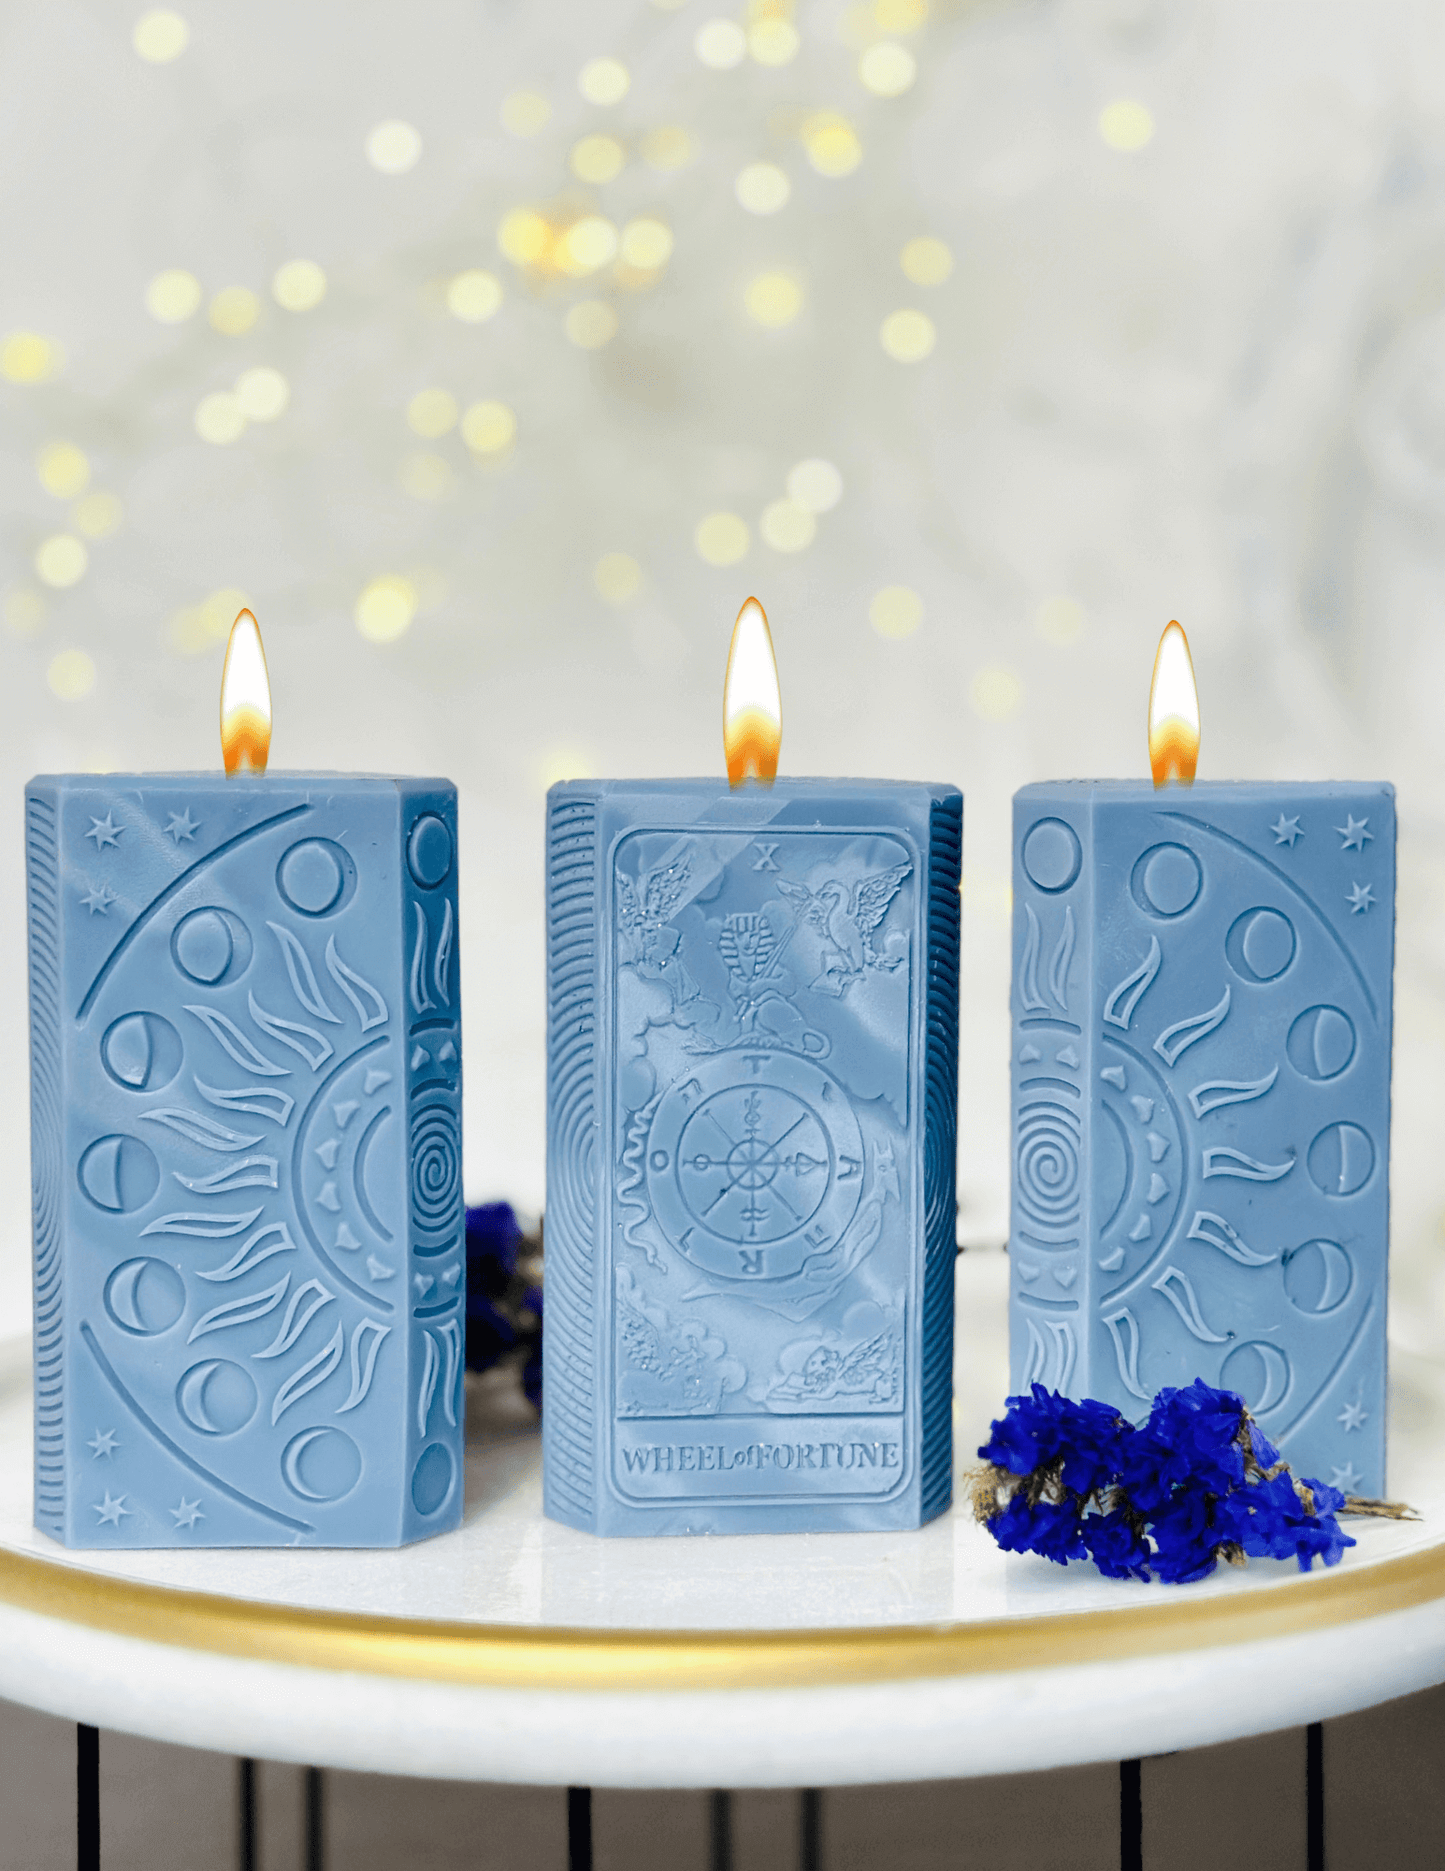 Wheel of Fortune Tarot card and moon phases candle mold, Silicone candle mold